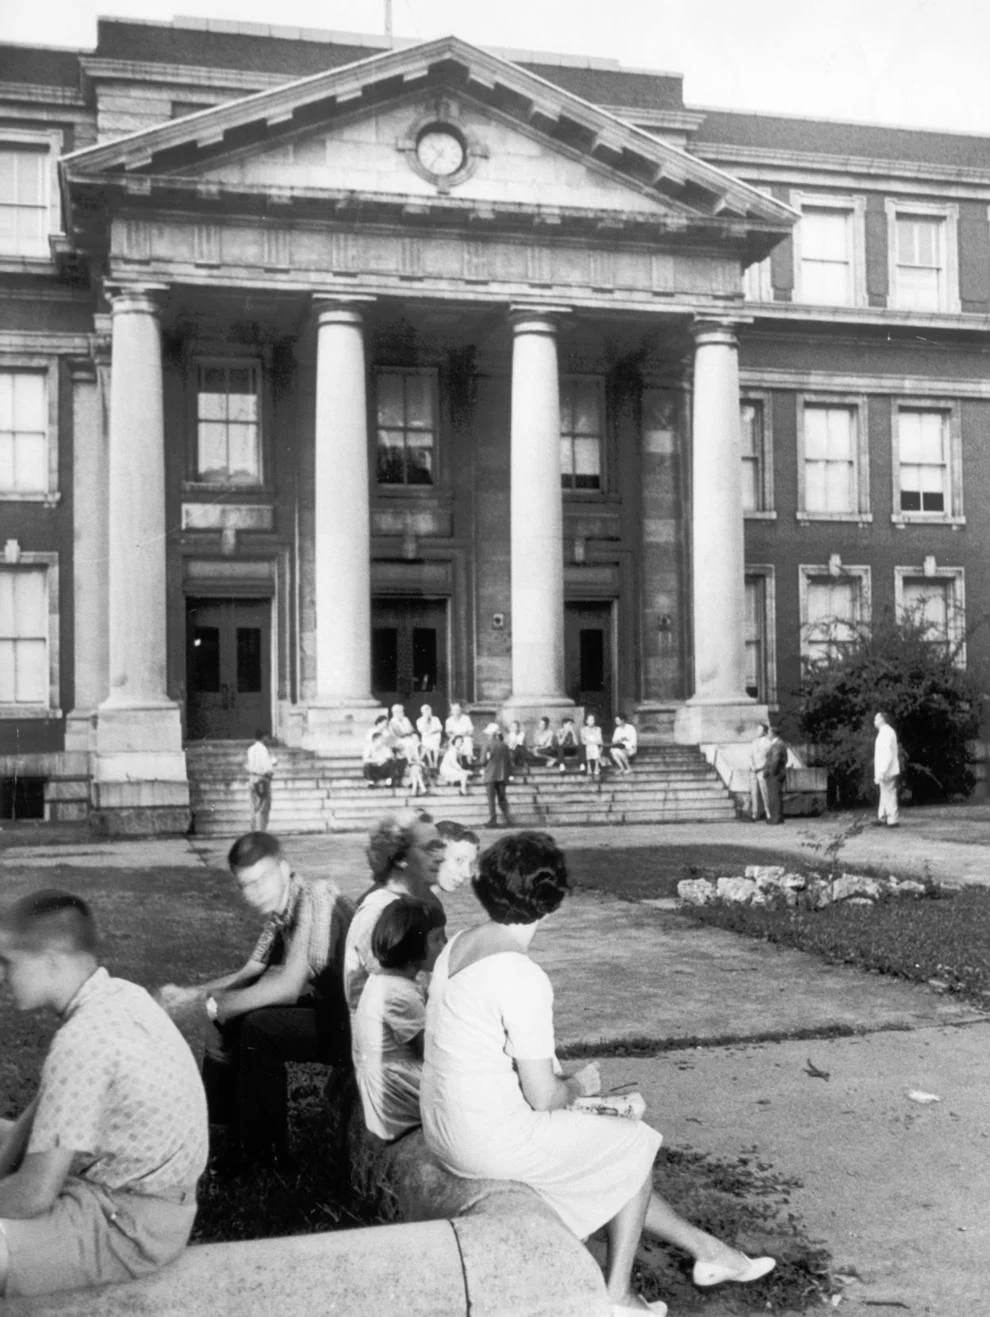 About 25 alumni of Richmond’s old John Marshall High School demonstrated against a plan to demolish the building, 1961.